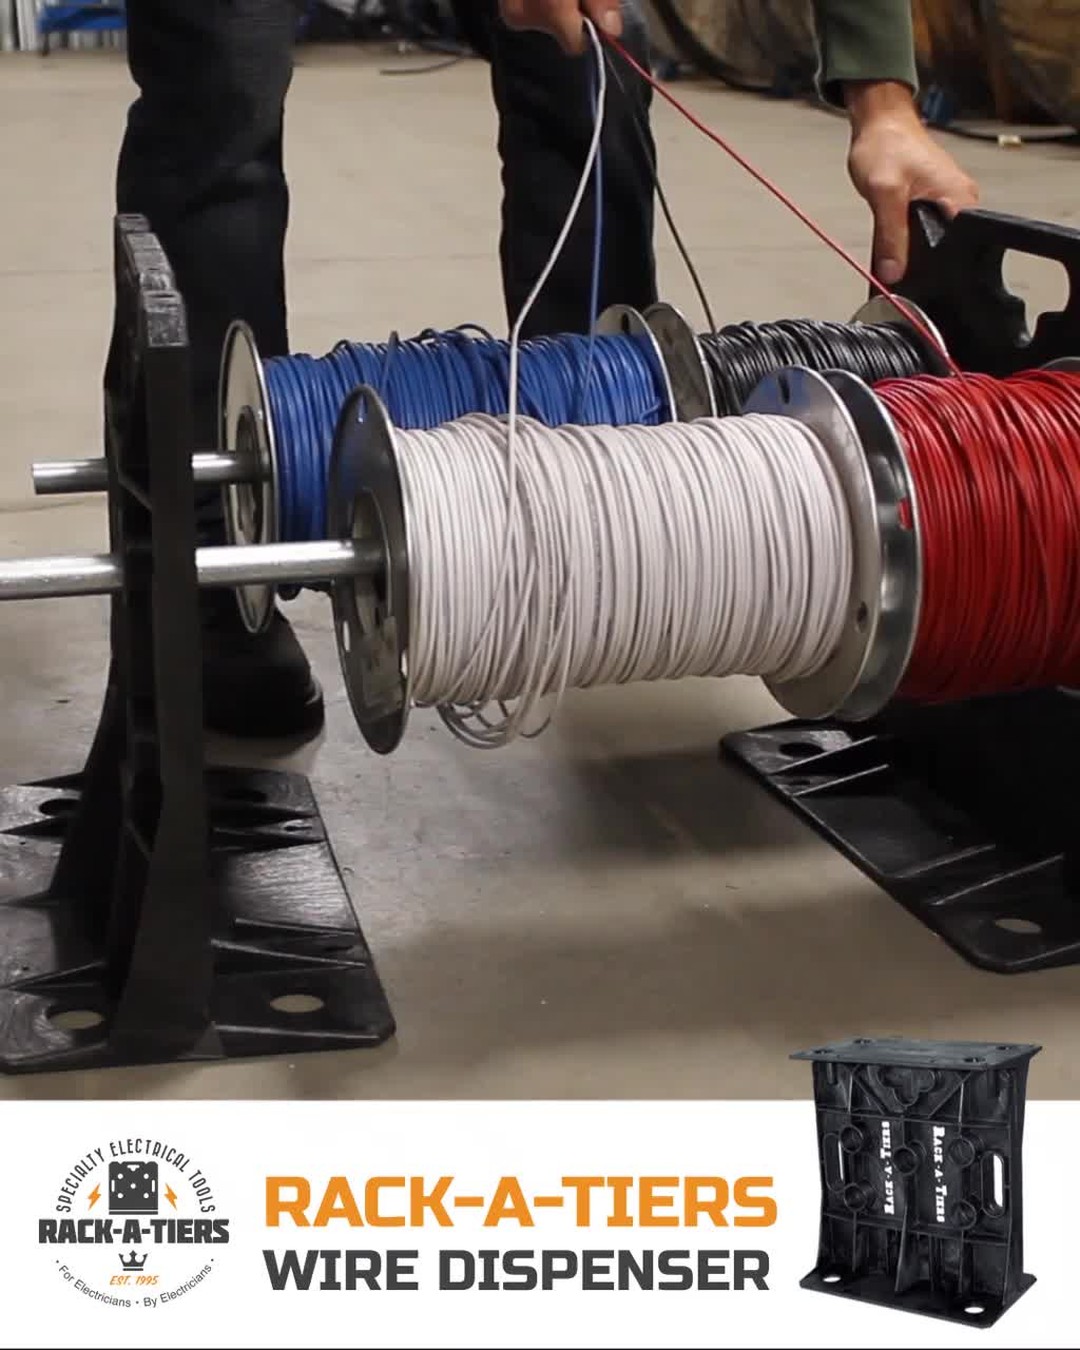 Rack-A-Tiers Wire Dispenser - Rack-A-Tiers